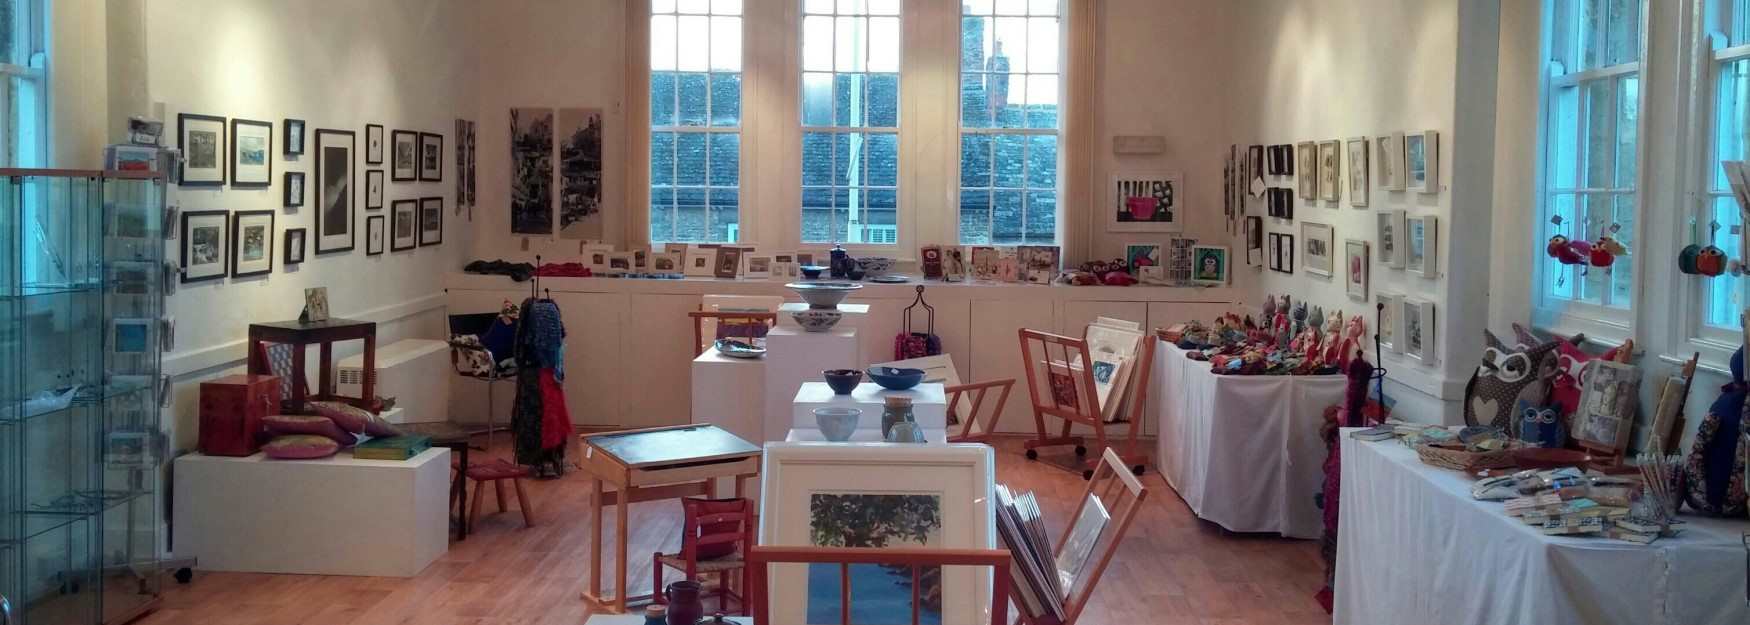 The gallery at West Ox Arts in Bampton